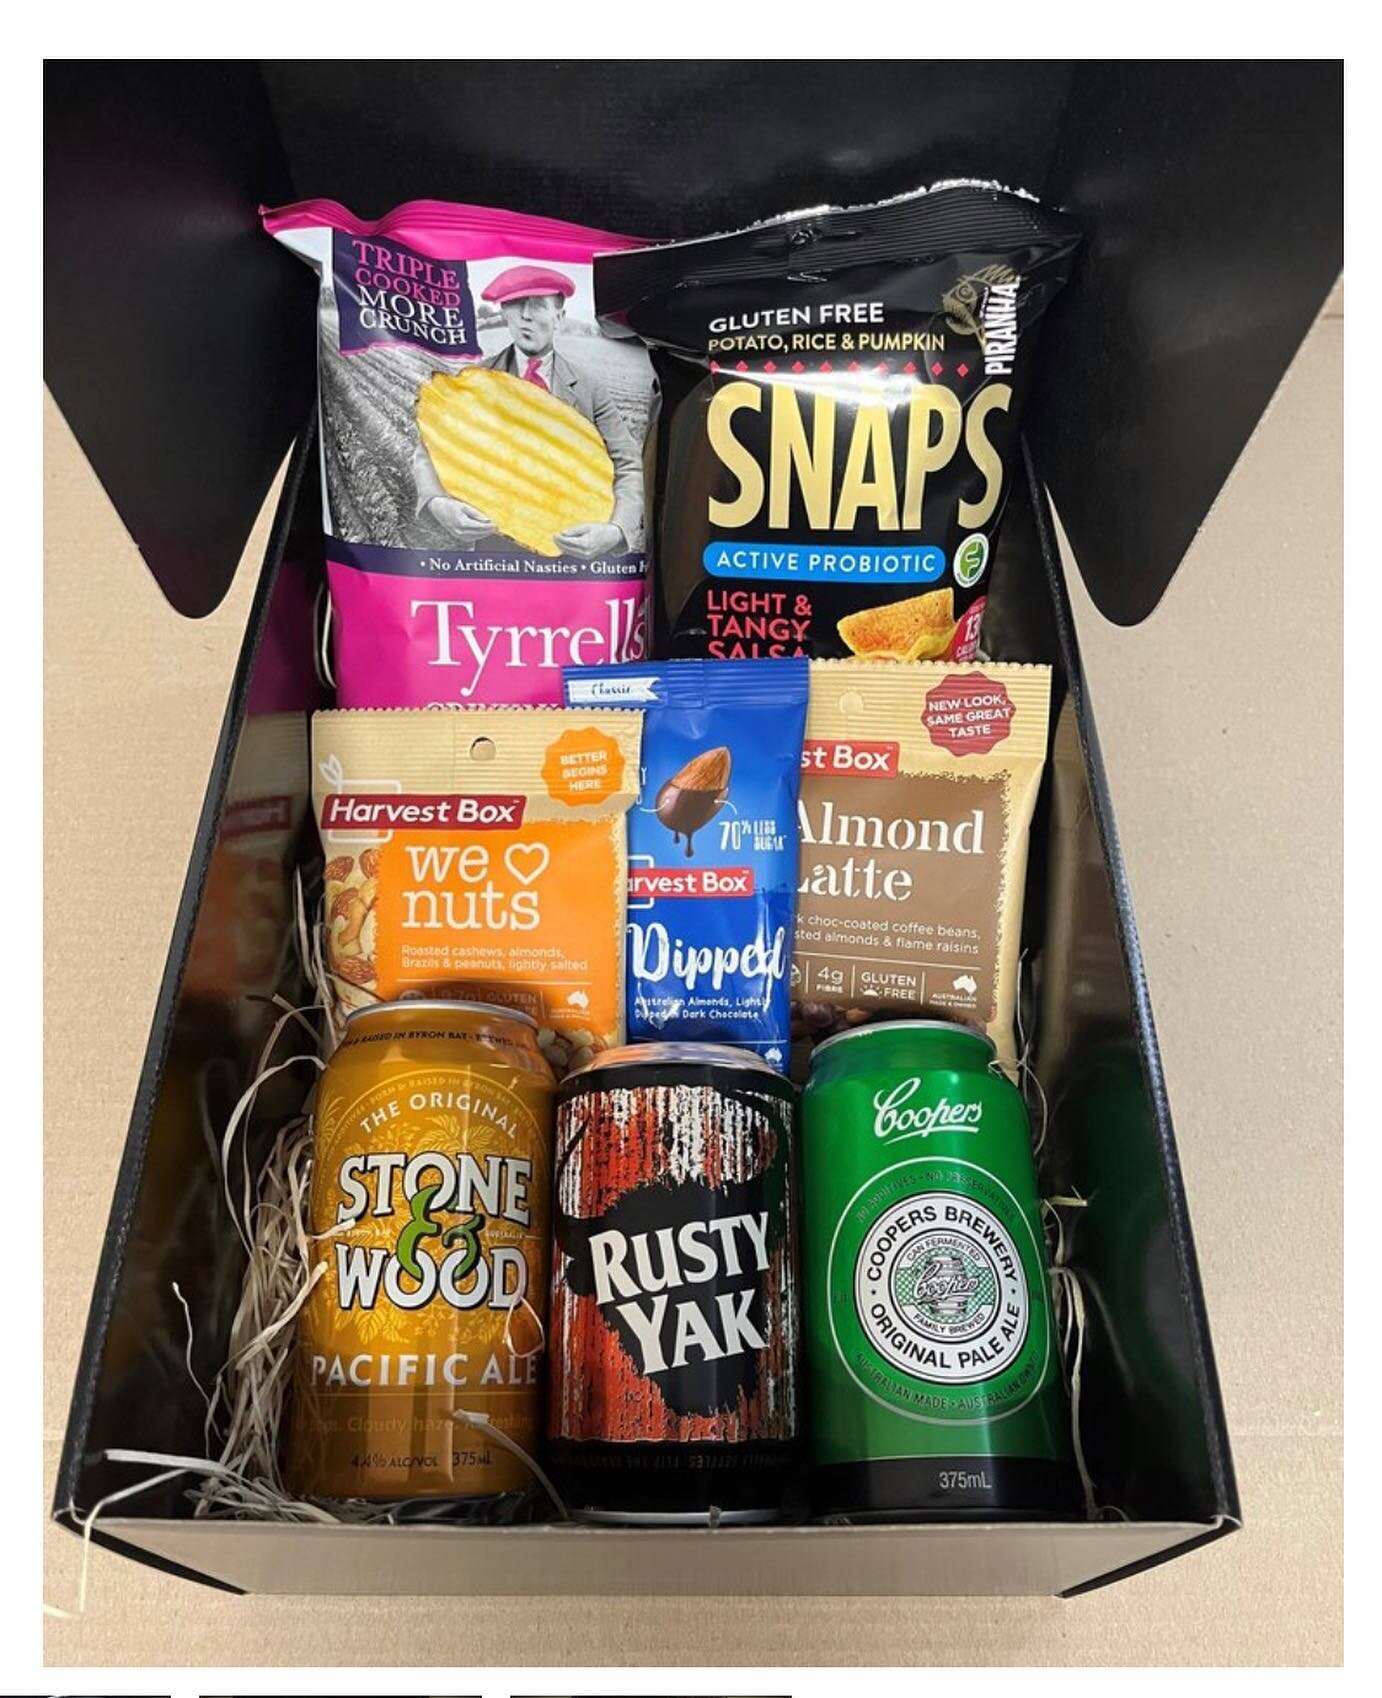 Local Beer Hampers!
So good!
Say thank you to your favorite clients and staff this EOFY
https://www.honestysnacks.com.au .
#honestysnacks #hampers#eofy